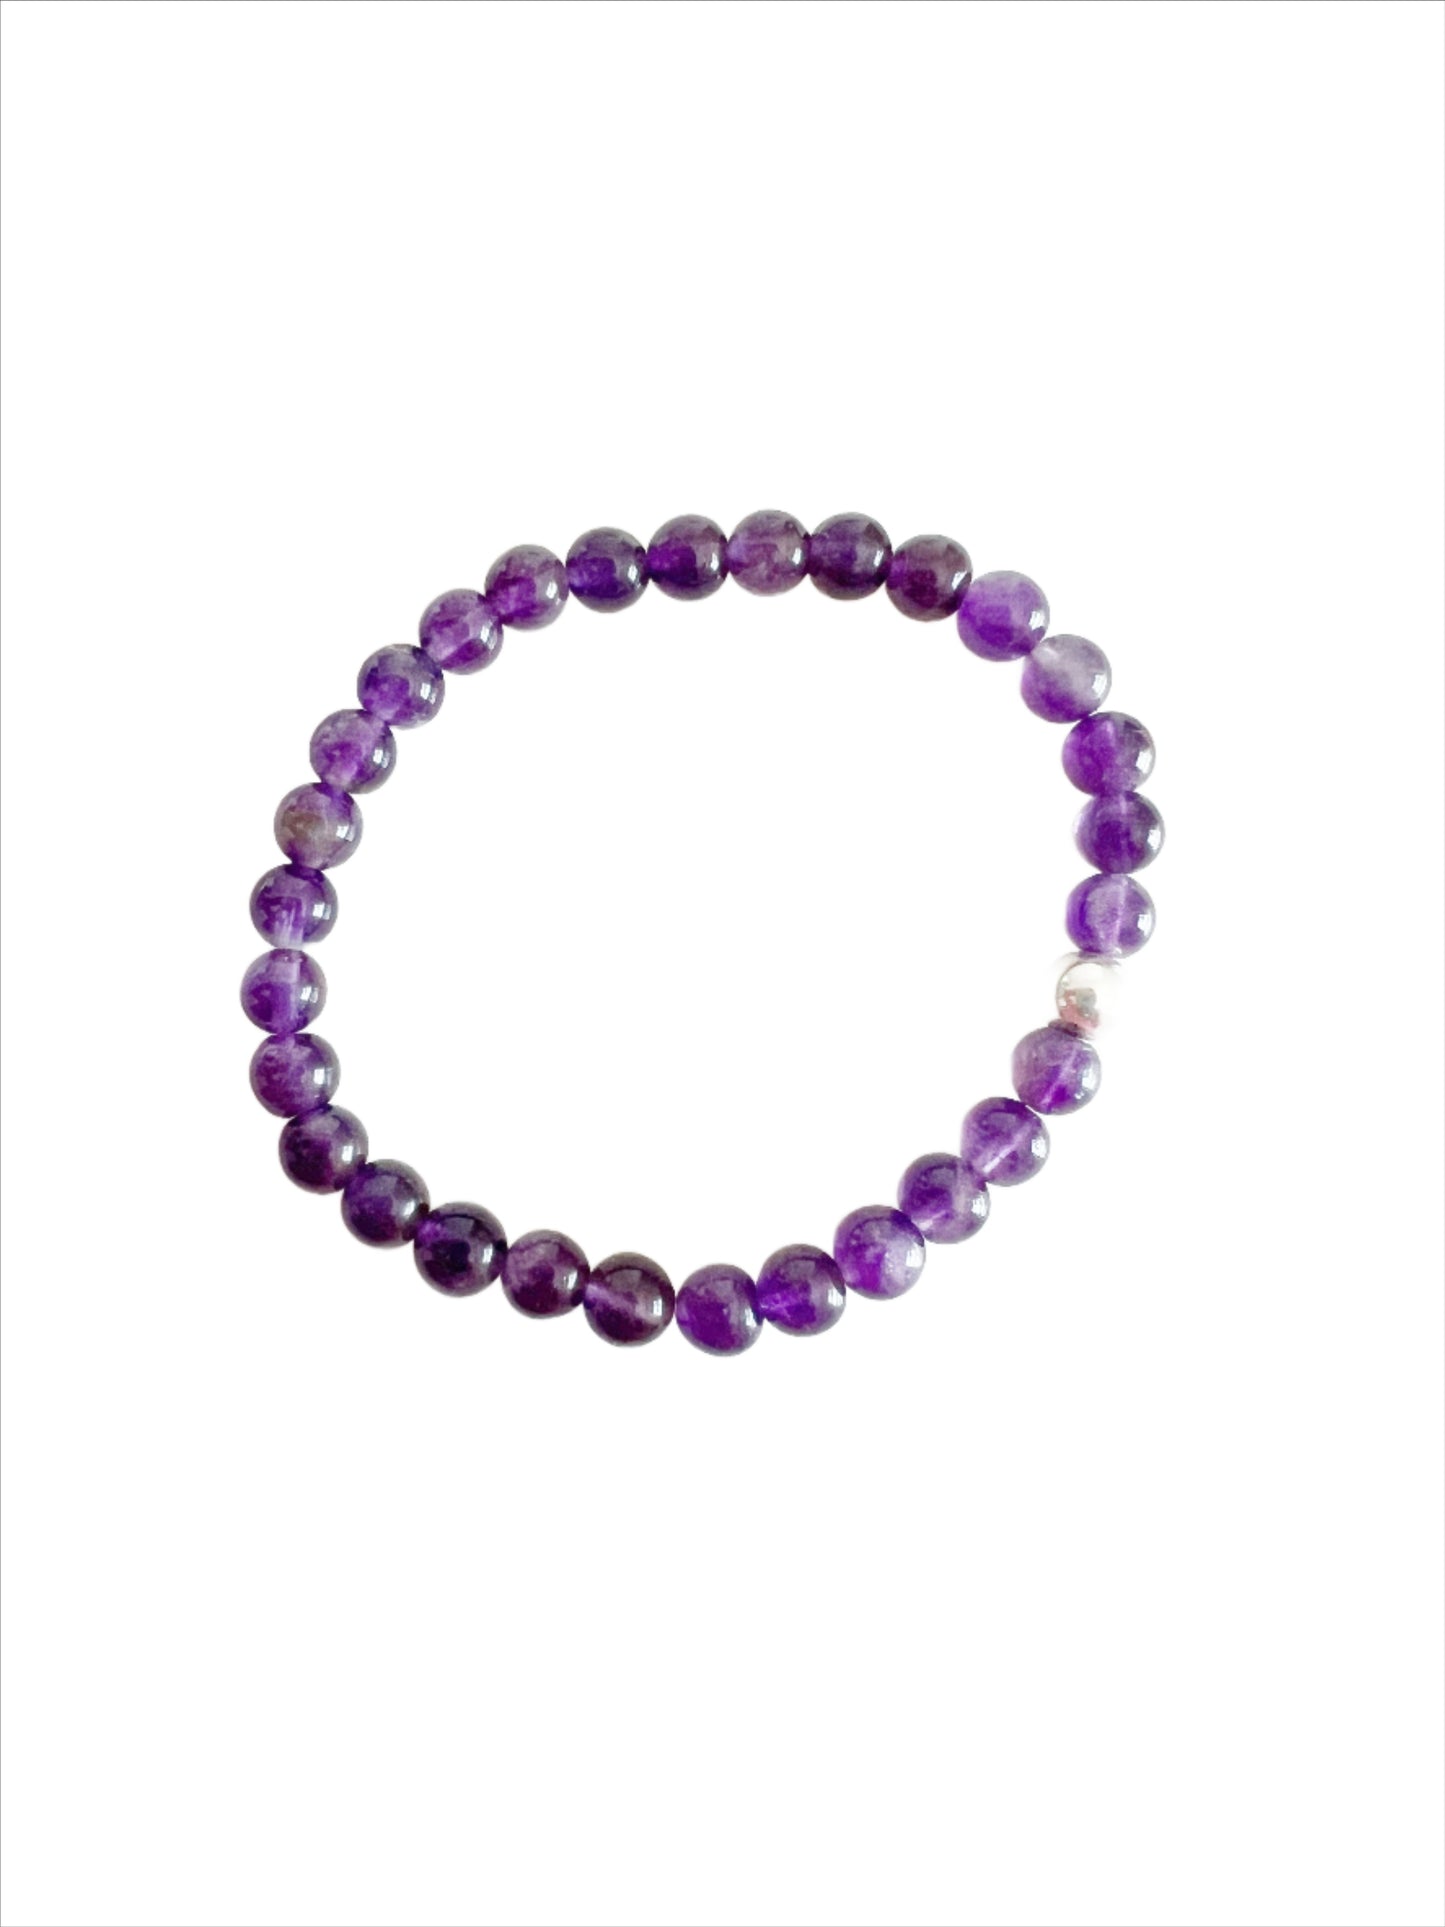 Amethyst stretch bracelet with one sterling silver bead on a white background.